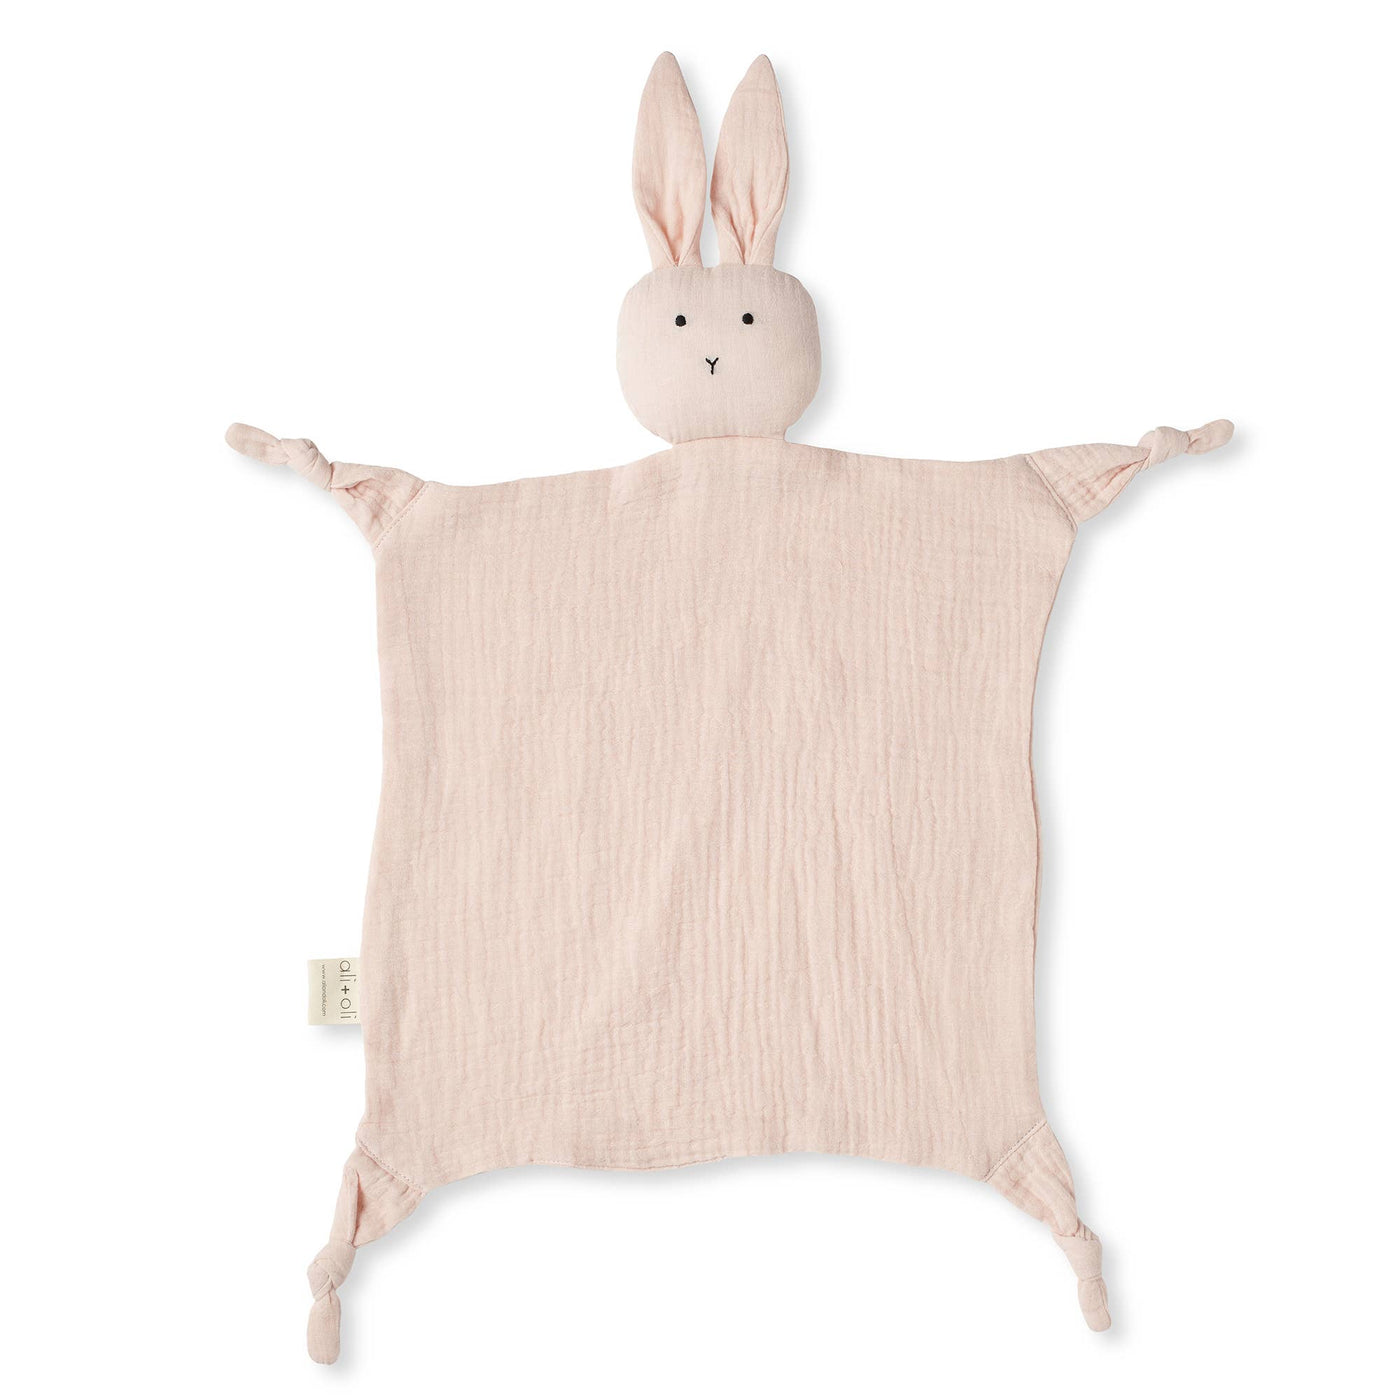 Cuddle Security Blanket Soft Muslin Cotton - Bunny (Pink)